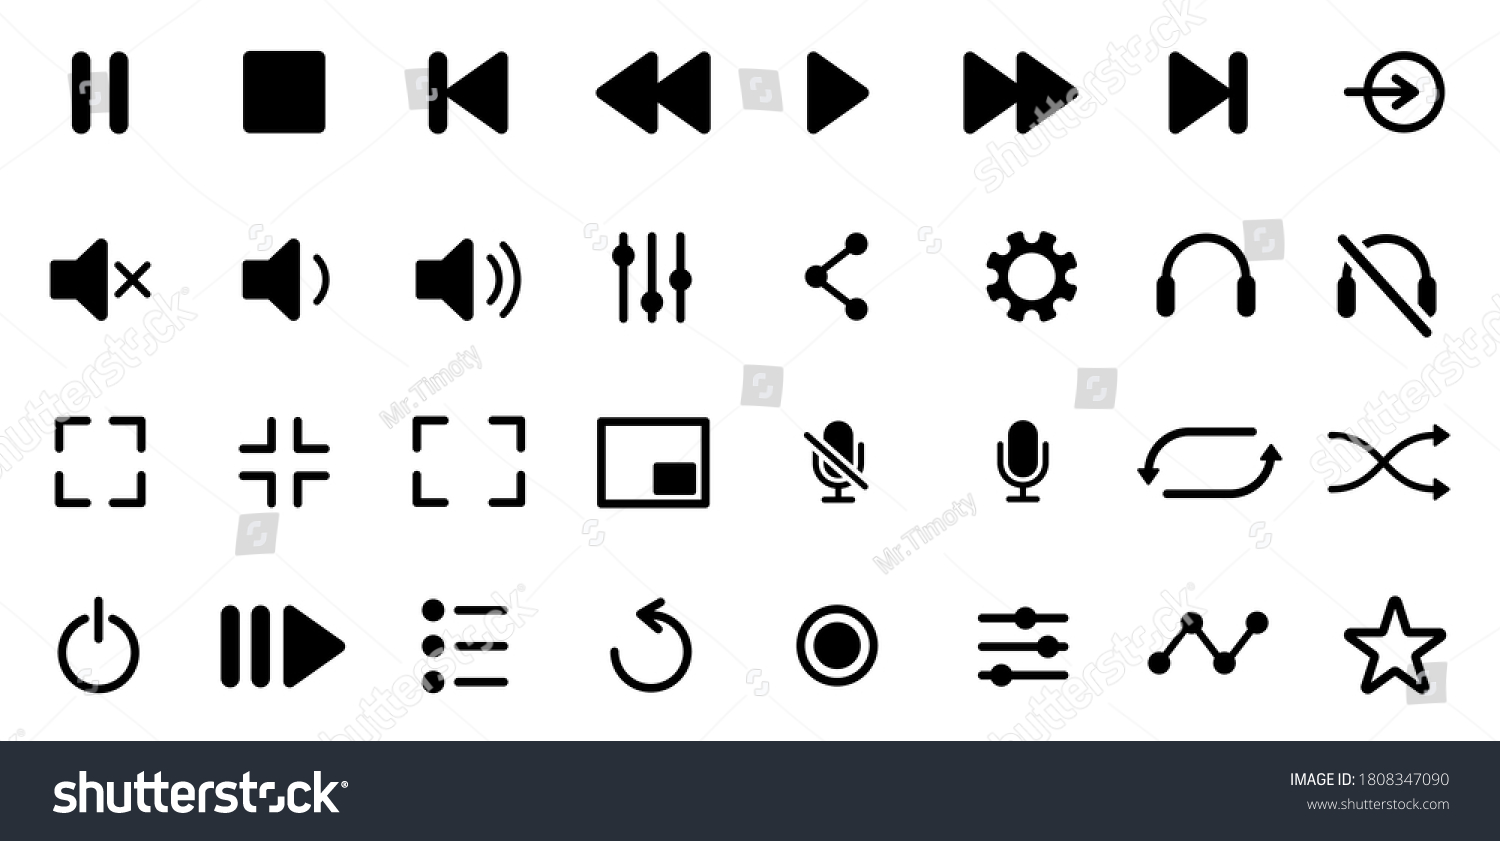 Media player icons set. Collection of multimedia symbols and audio, music speaker volume, interface, design media player buttons. Play, pause, stop, record, forward, rewind, previous, next, eject. #1808347090